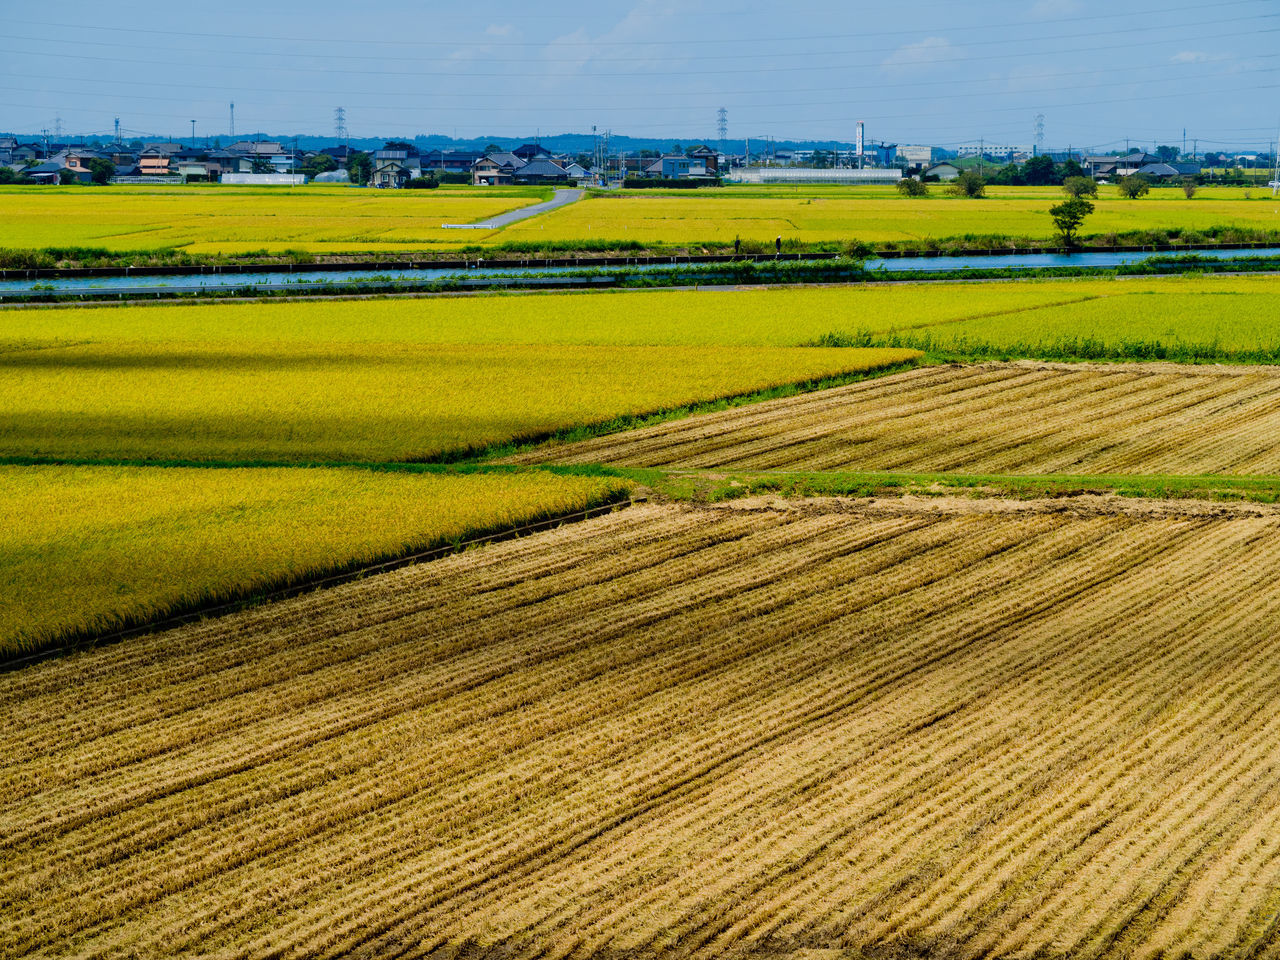 landscape, agriculture, field, rural scene, environment, land, farm, plain, crop, scenics - nature, plant, beauty in nature, nature, paddy field, grassland, growth, rapeseed, food, tranquility, sky, tranquil scene, no people, day, prairie, cereal plant, outdoors, rural area, green, idyllic, yellow, horizon, cultivated land, sunlight, produce, harvesting